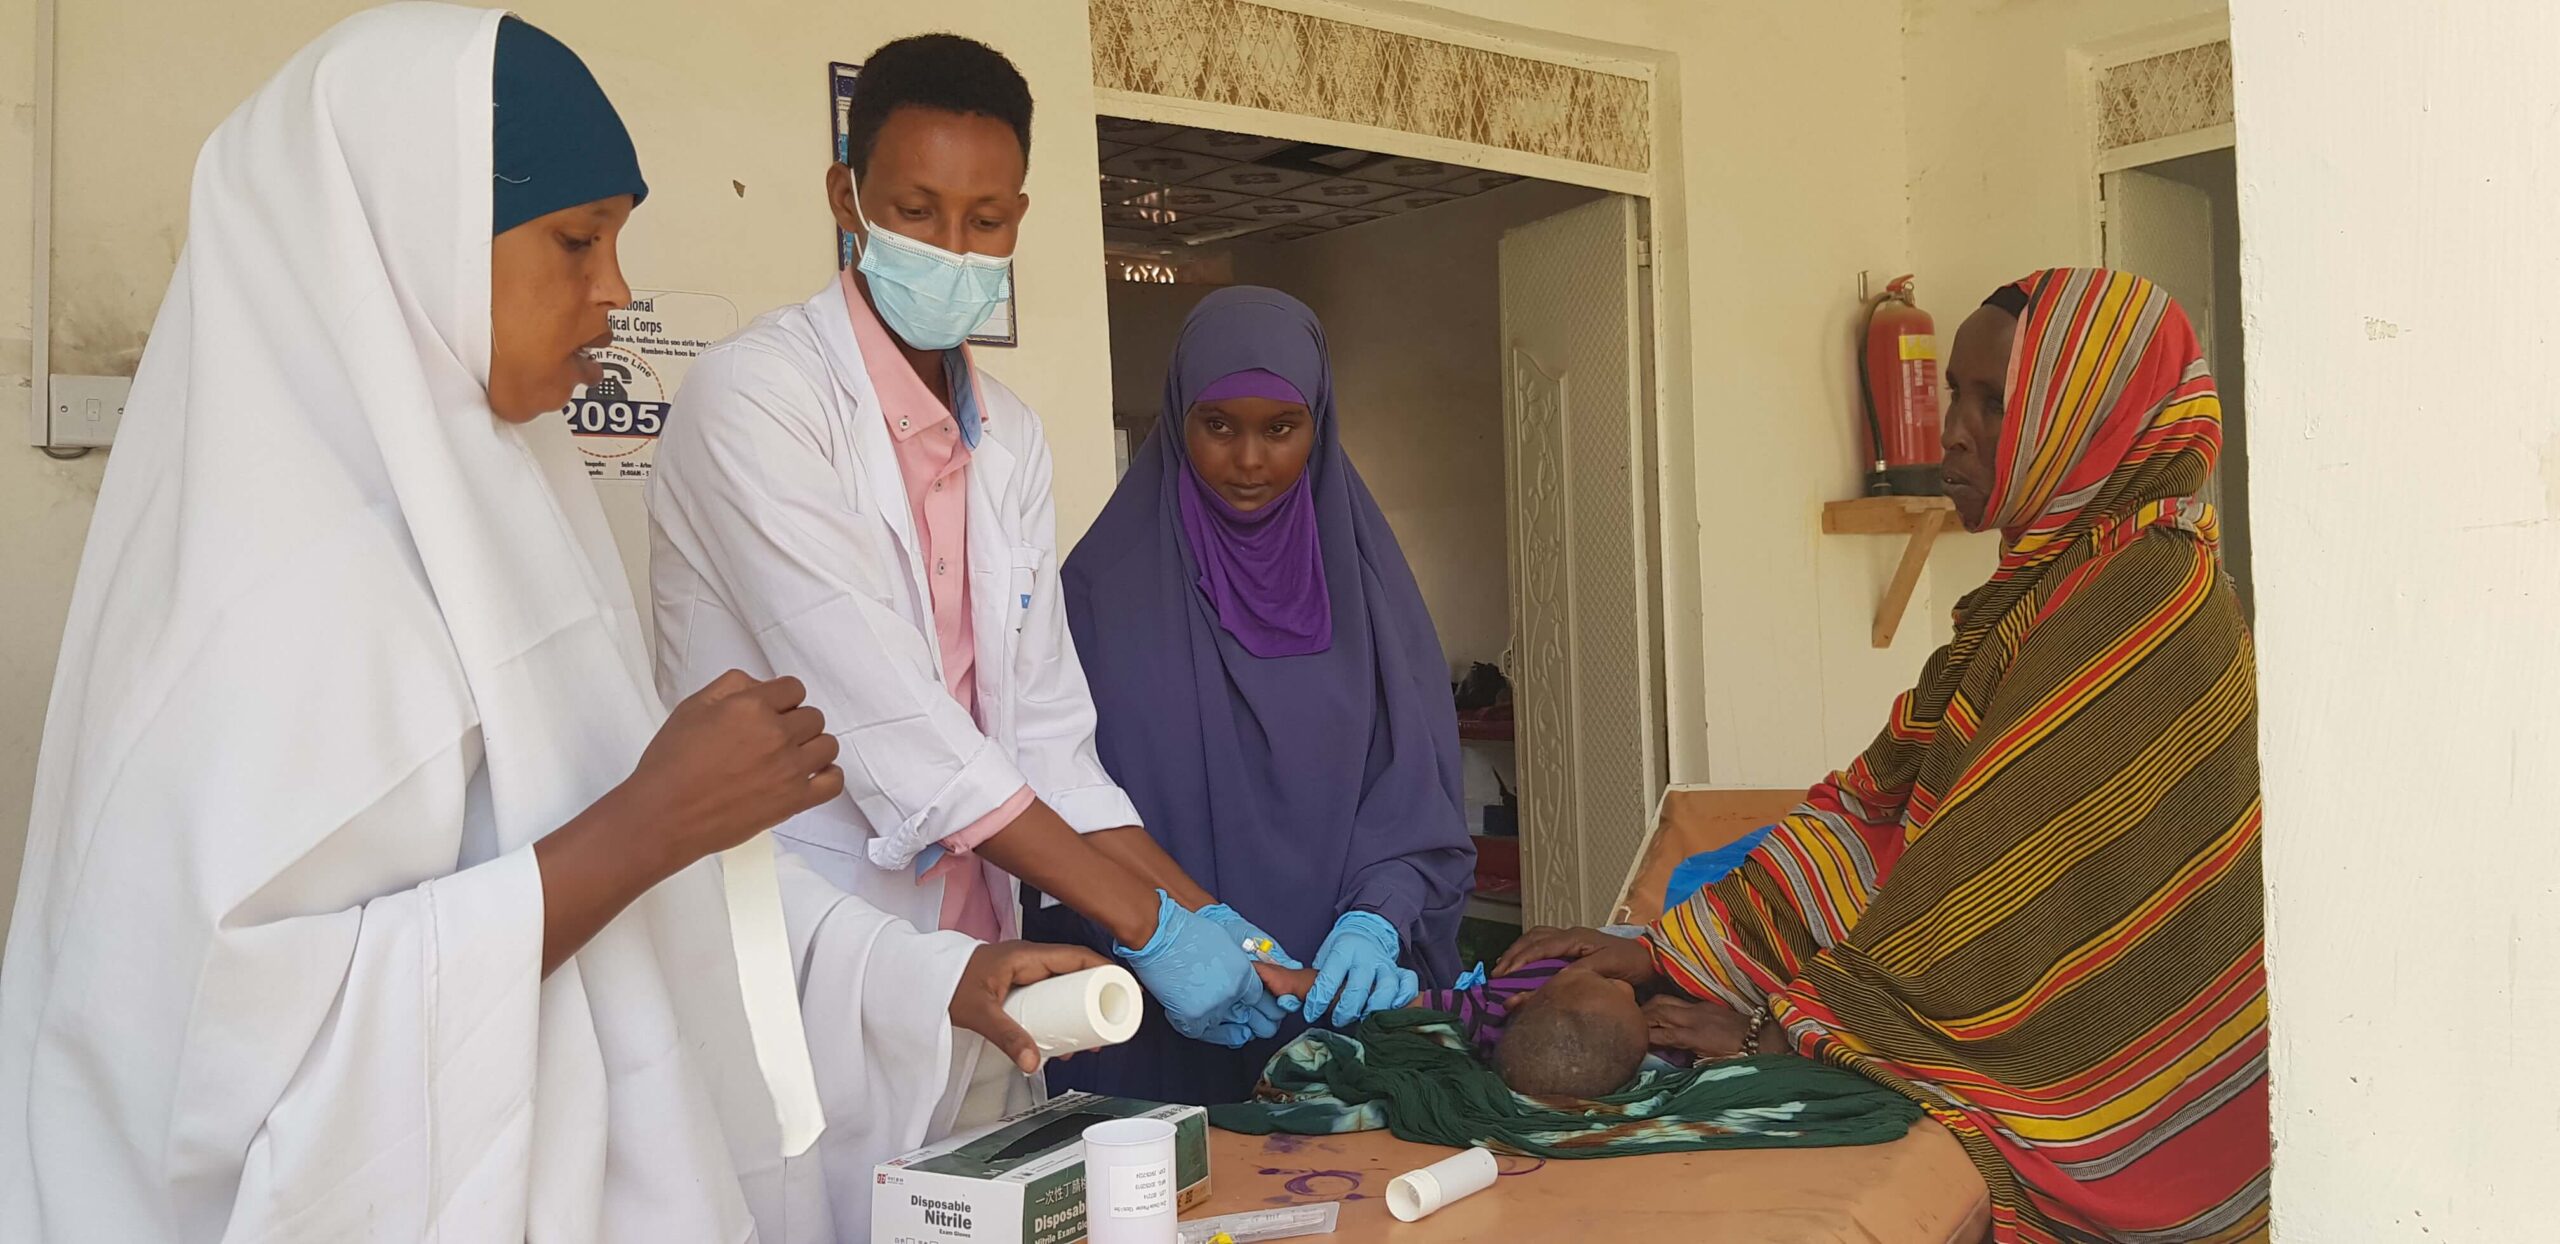 Our team at the Galkacyo Hospital is distributing lifesaving medical supplies, and treating children suffering from acute malnutrition and other nutrition-related diseases.